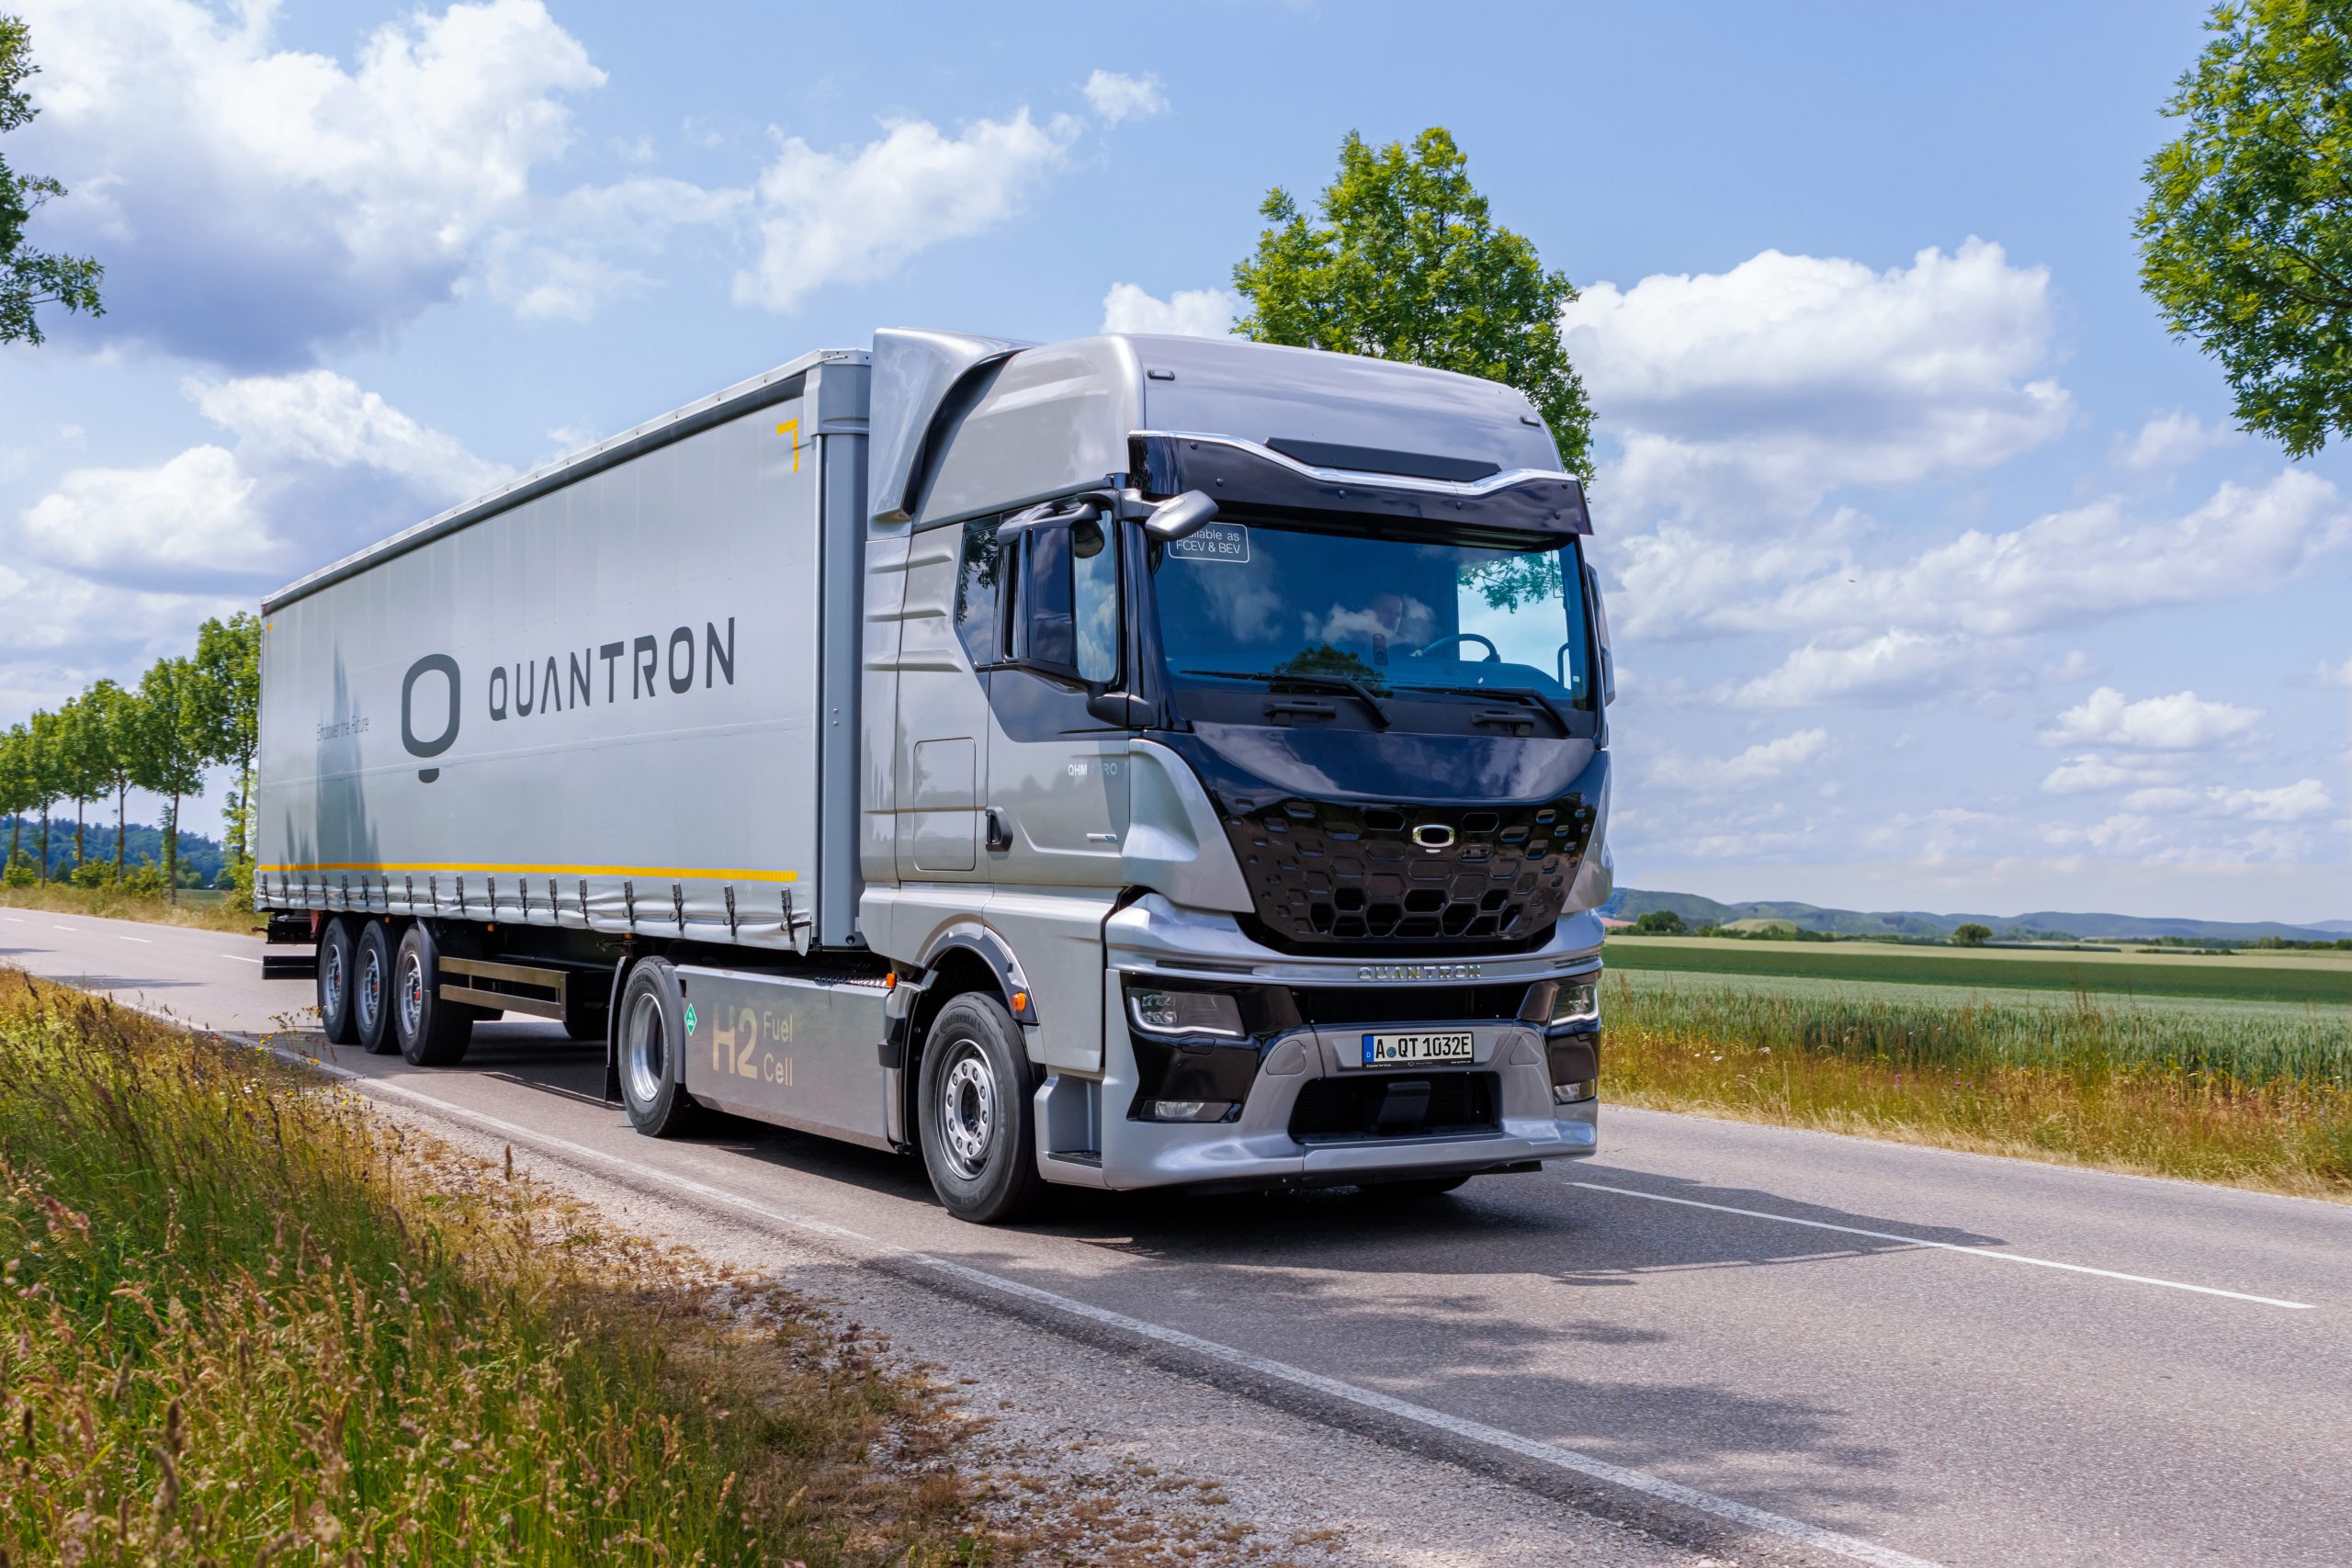 The publicly accessible refuelling station near Middlesbrough town centre will be able to dispense up to 1.5 tonnes of hydrogen to heavy vehicles per day. Image: Novuna Vehicle Solutions